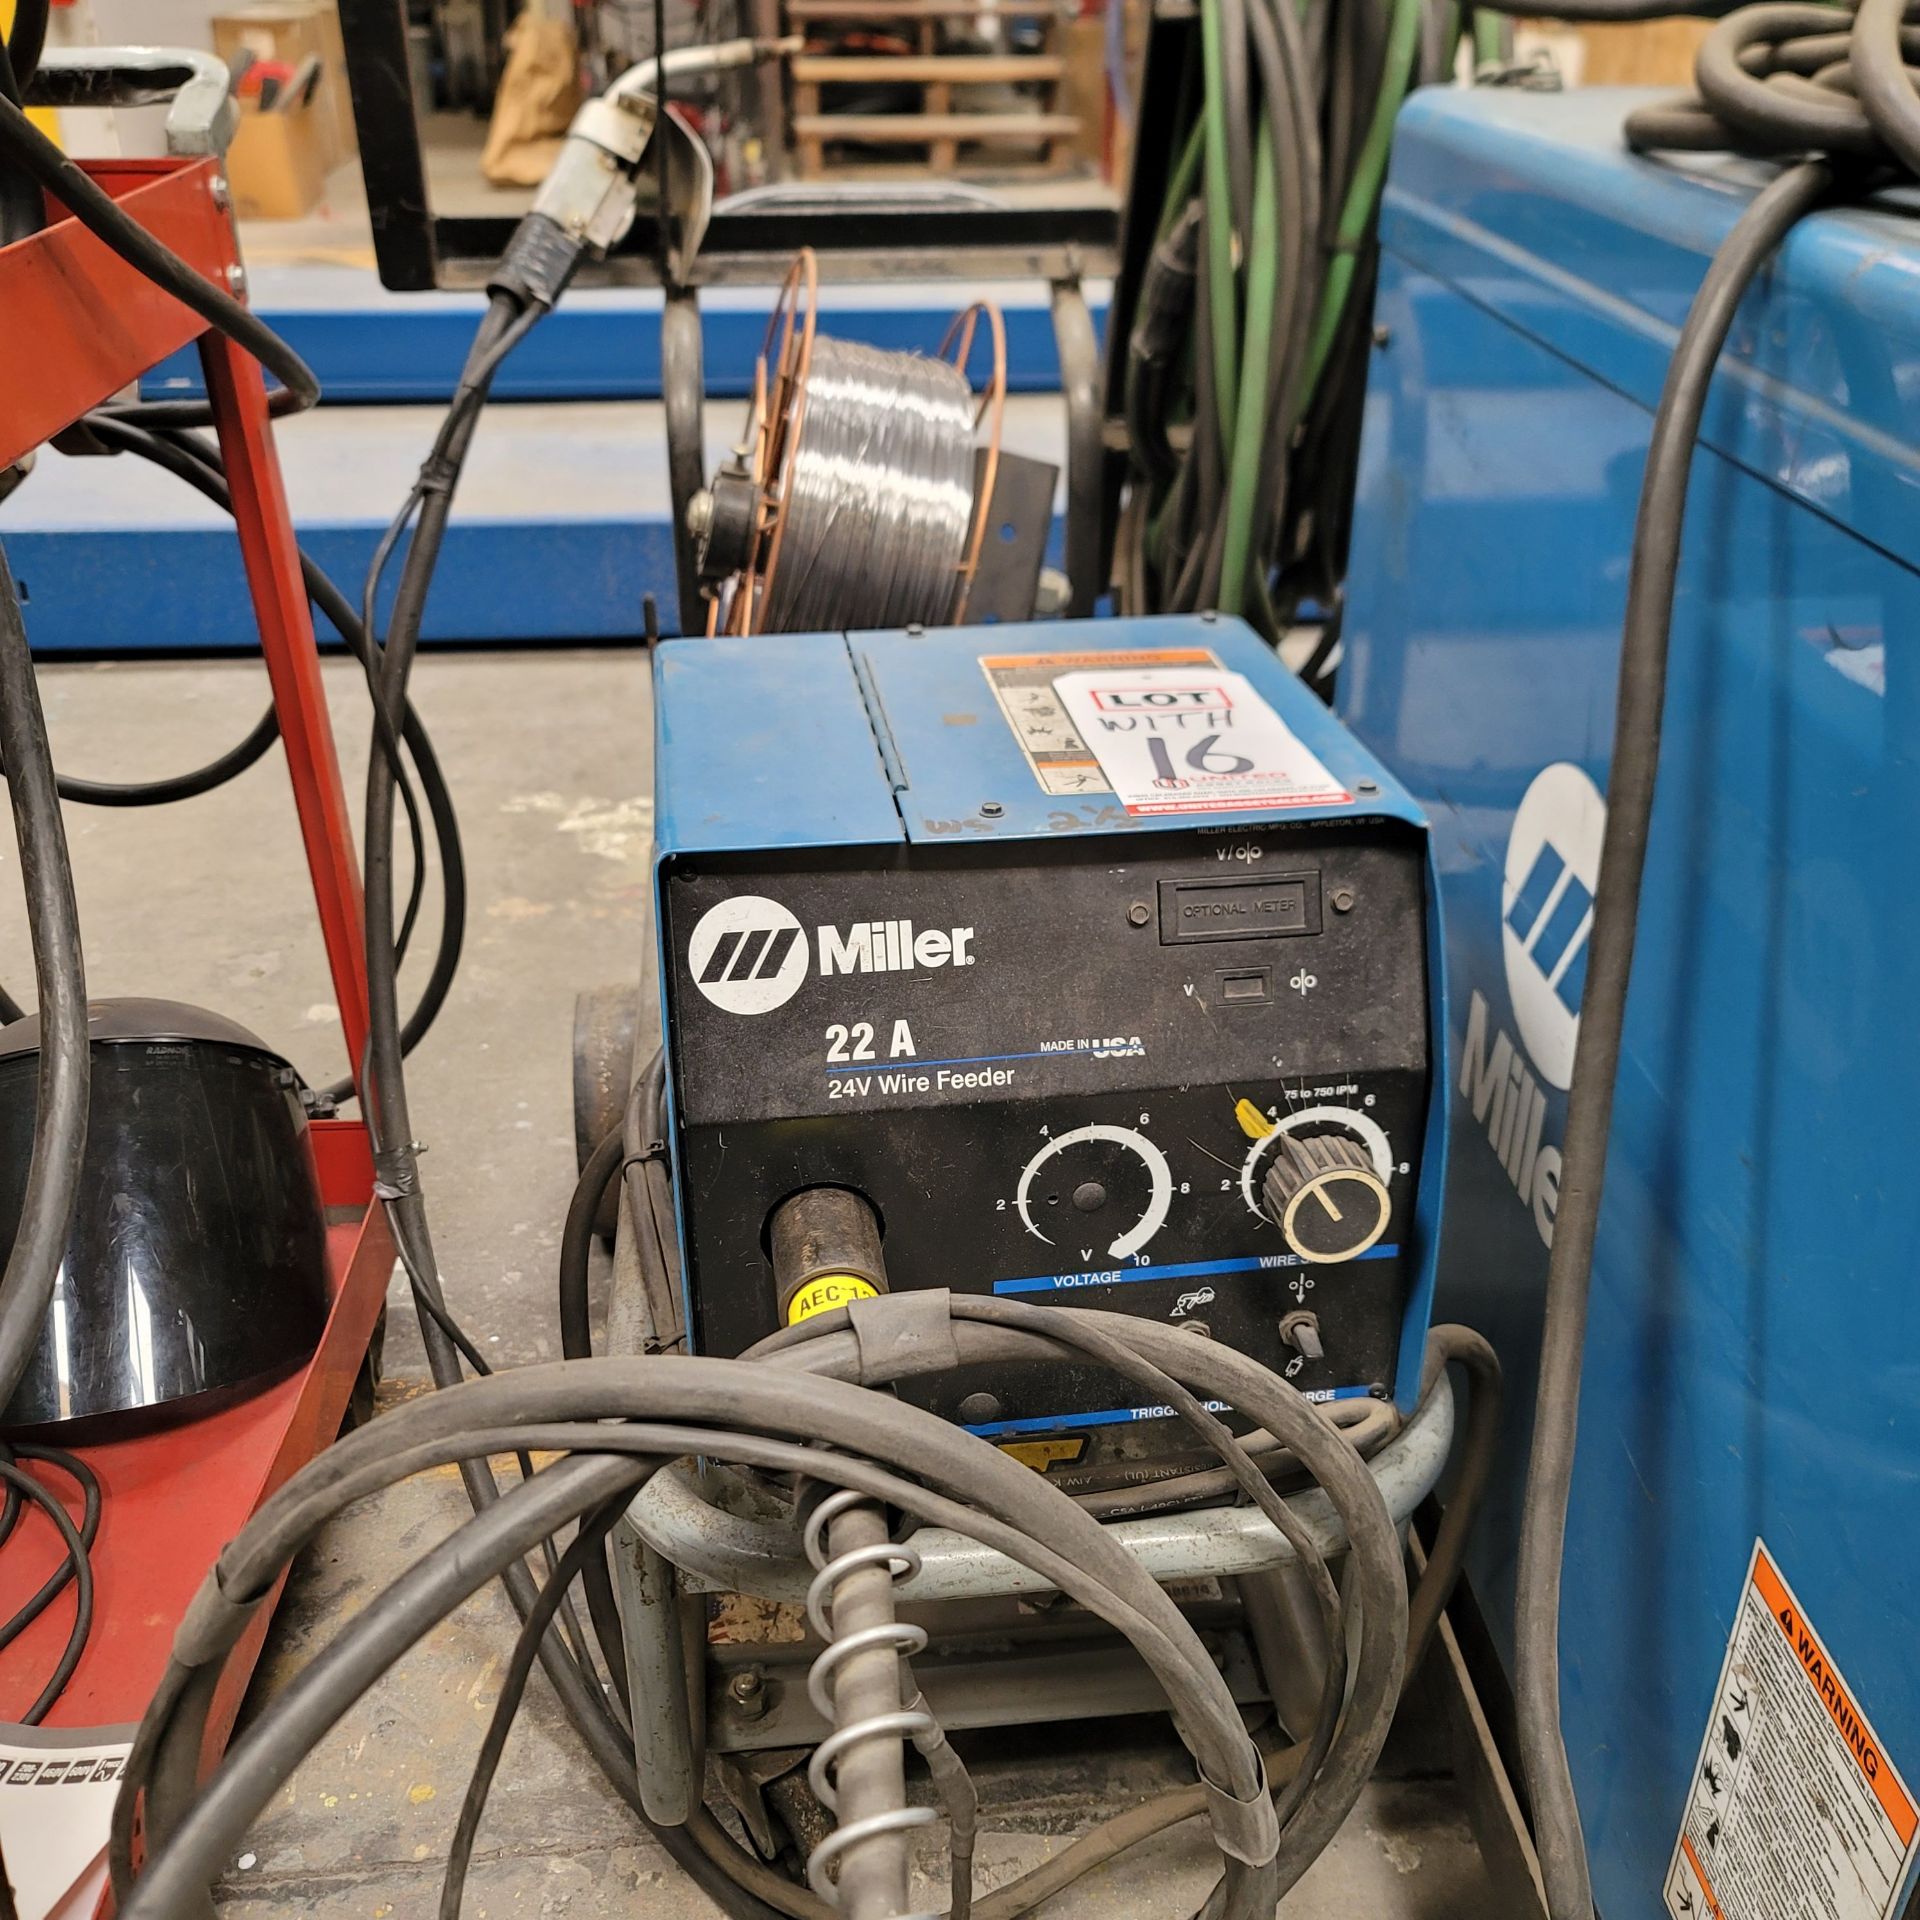 MILLER CP-302 WELDING POWER SOURCE, W/ MILLER 22A 24V WIRE FEEDER, STOCK NO. 903786, S/N KH450266 - Image 3 of 5